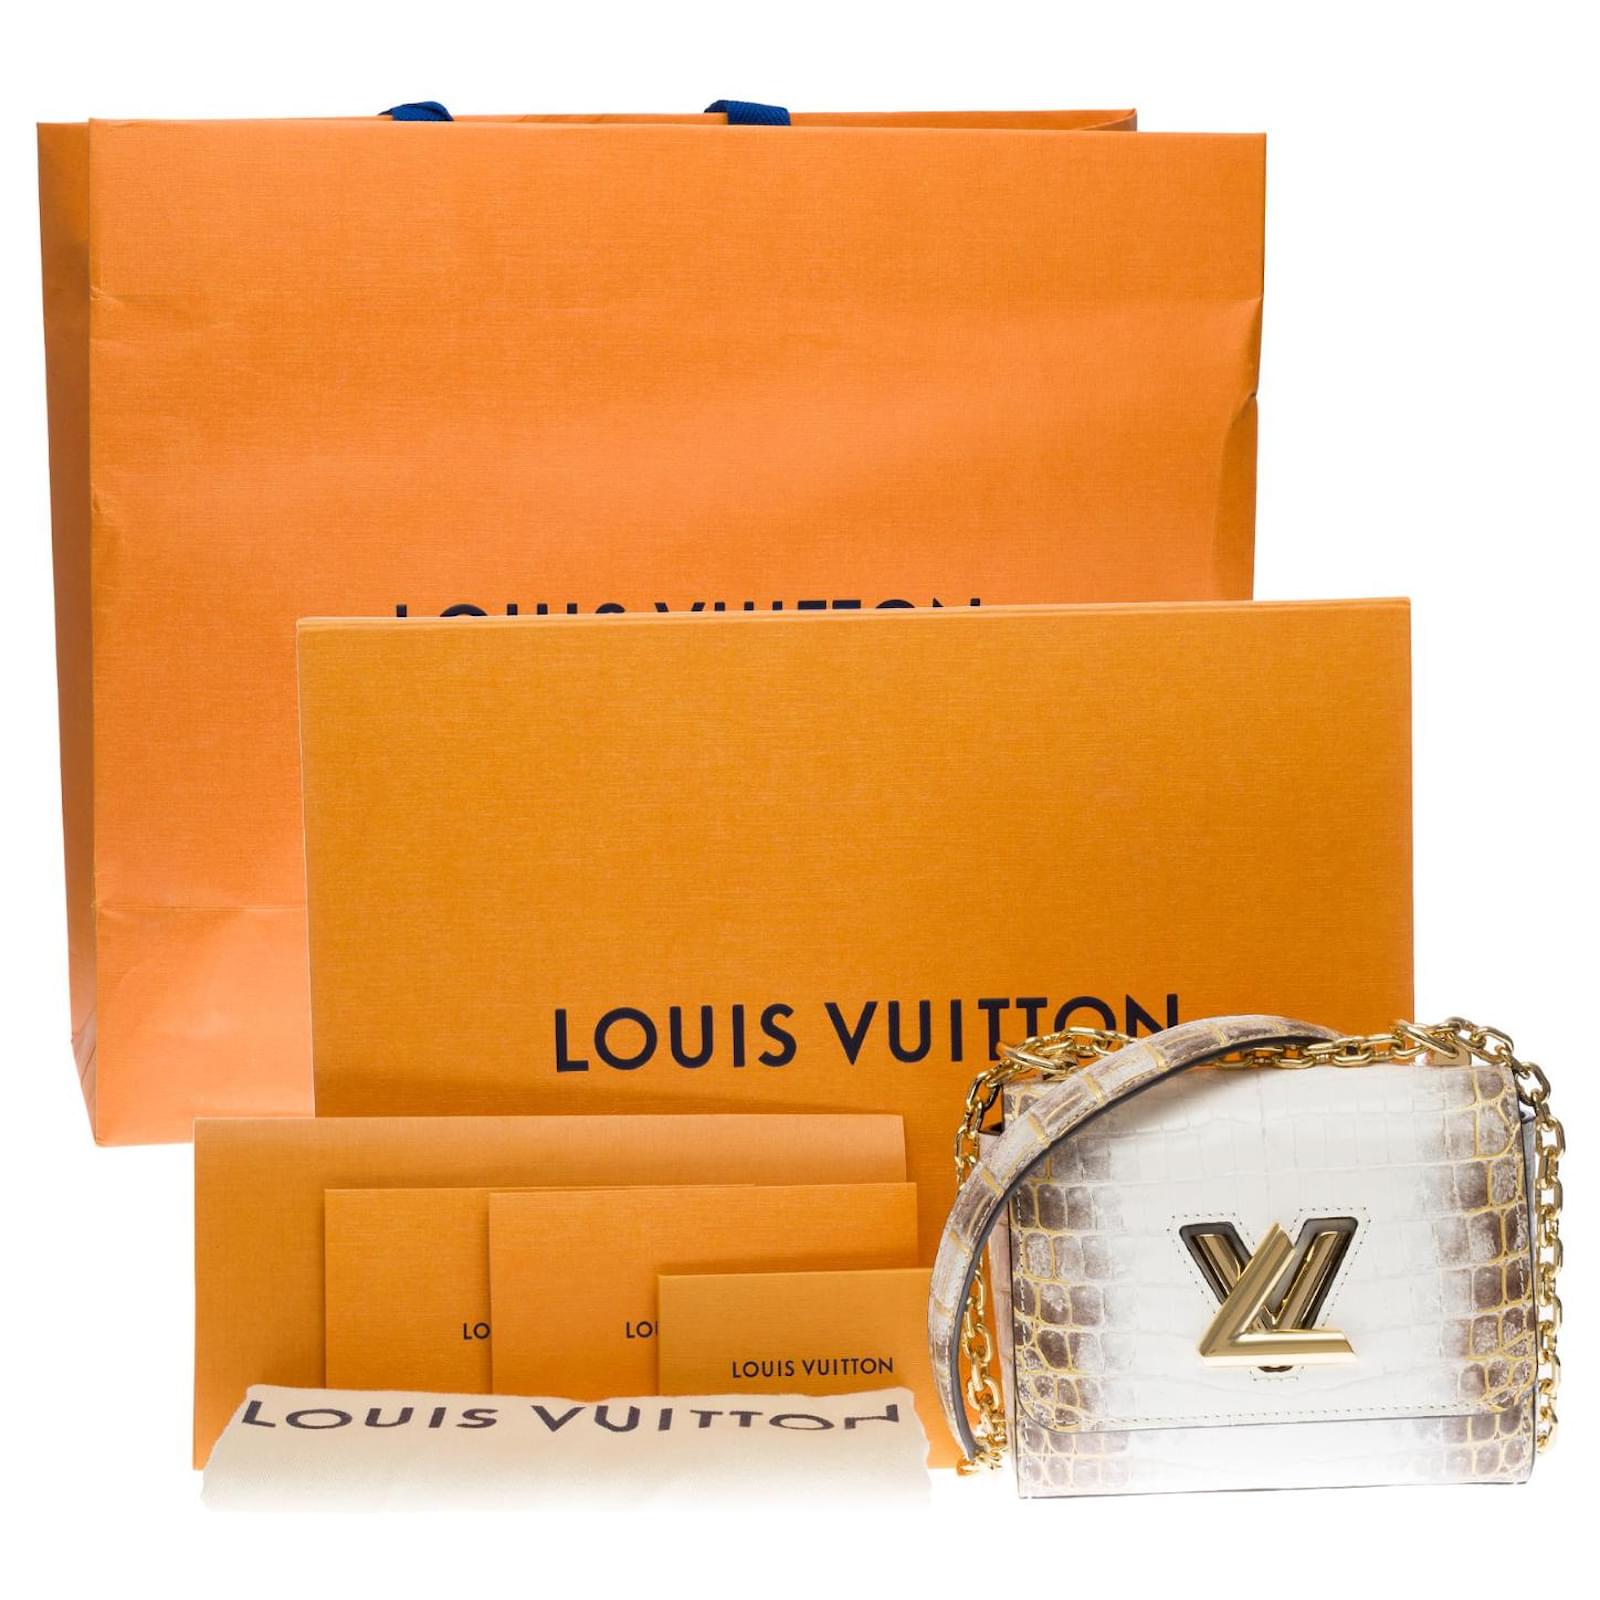 NEW Louis Vuitton Mini Twist shoulder bag in White Crocodile leather and GHW